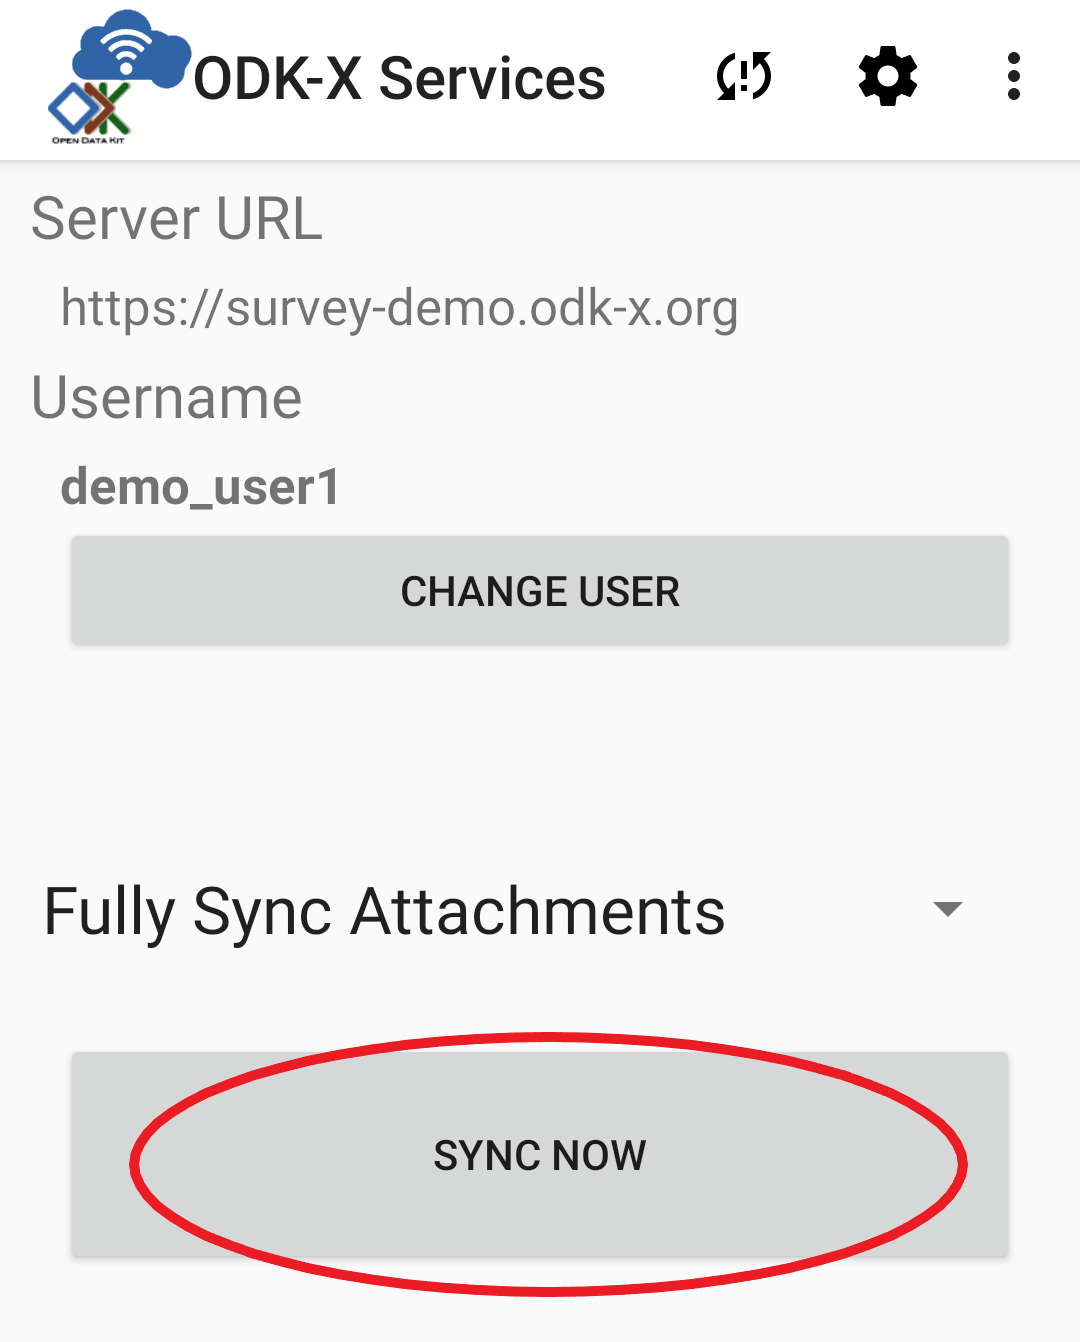 Syncing from the demo server